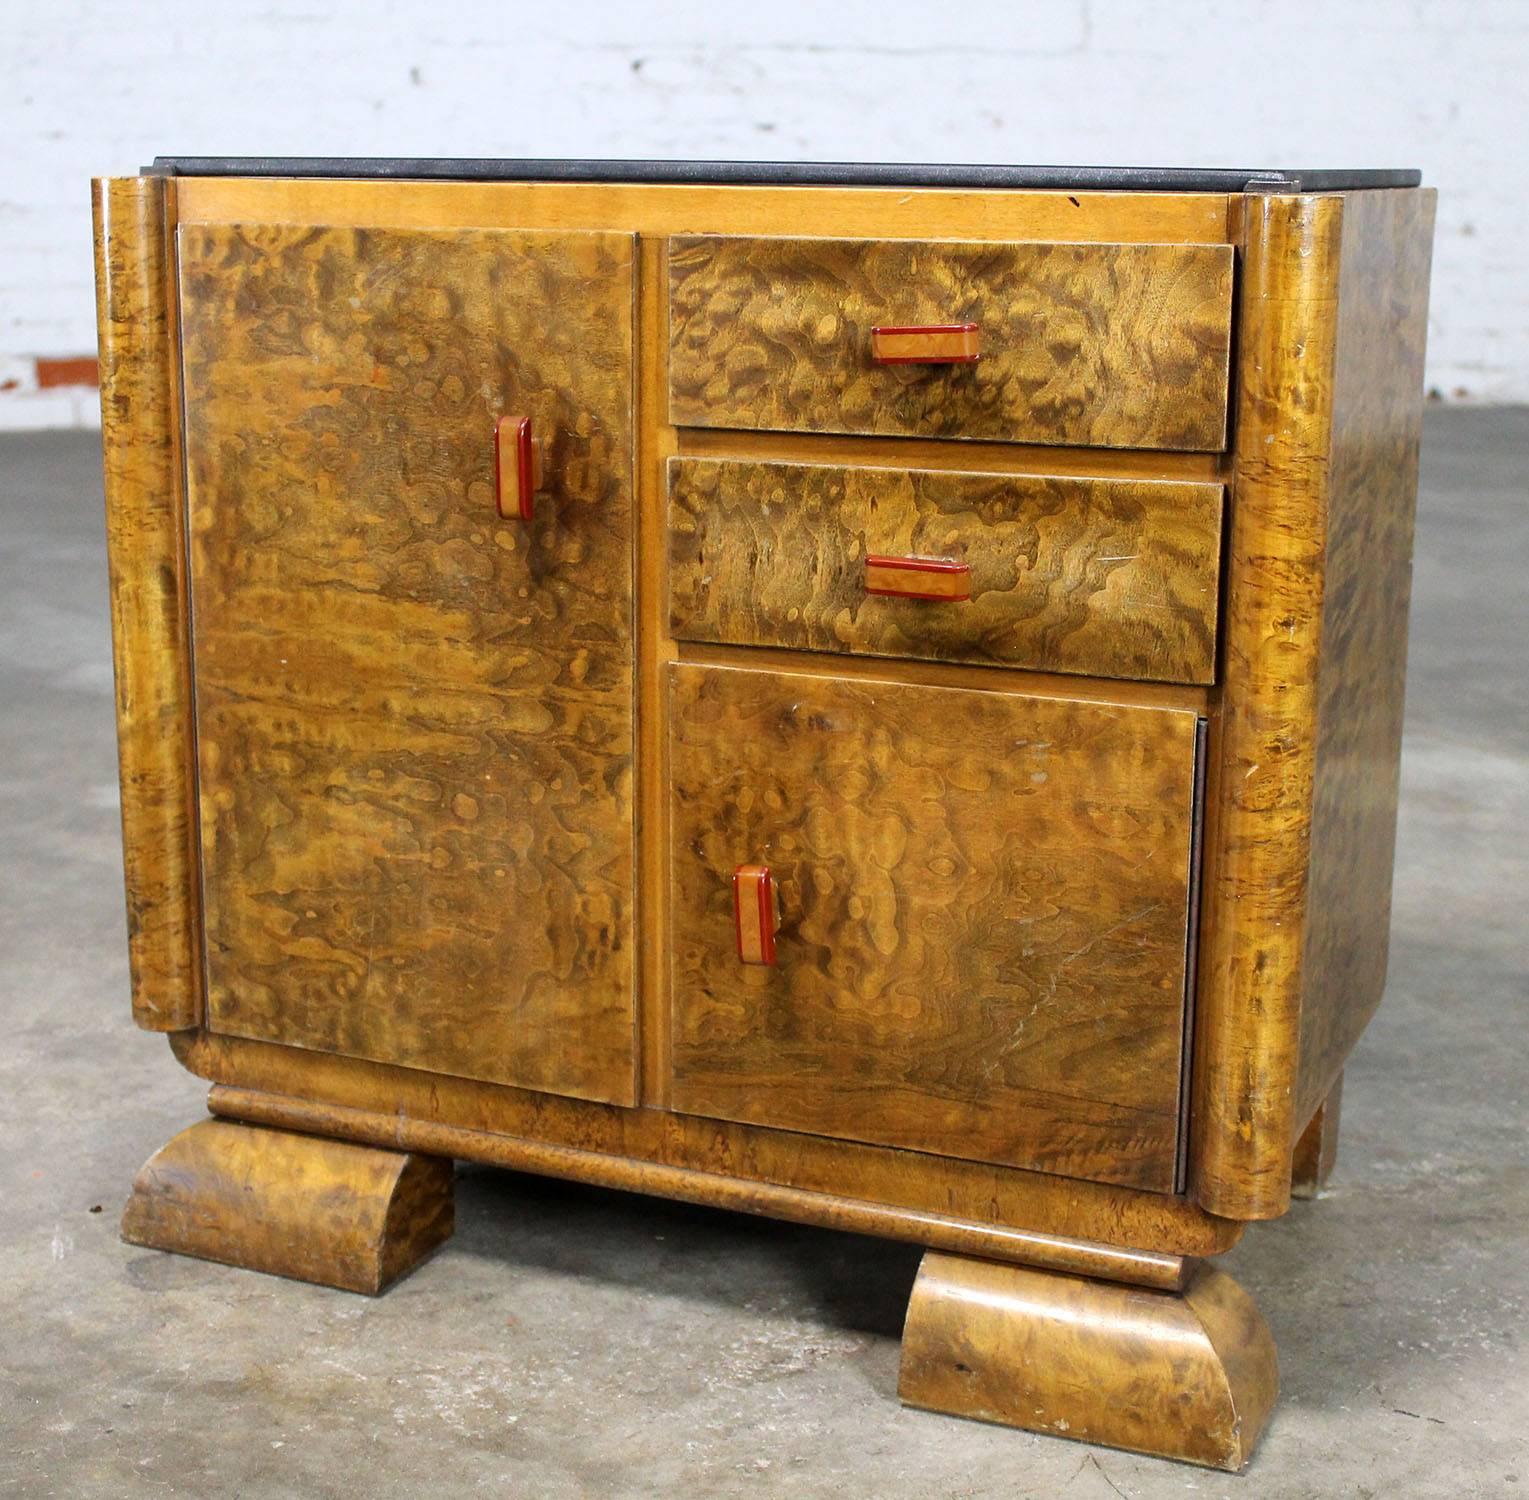 Wonderful petit sized Art Deco side cabinet or commode in gorgeous burl wood topped with a piece of black glass and accented with beautiful Bakelite handles. It is in fabulous vintage condition.

This is such a fabulous little Art Deco cabinet!